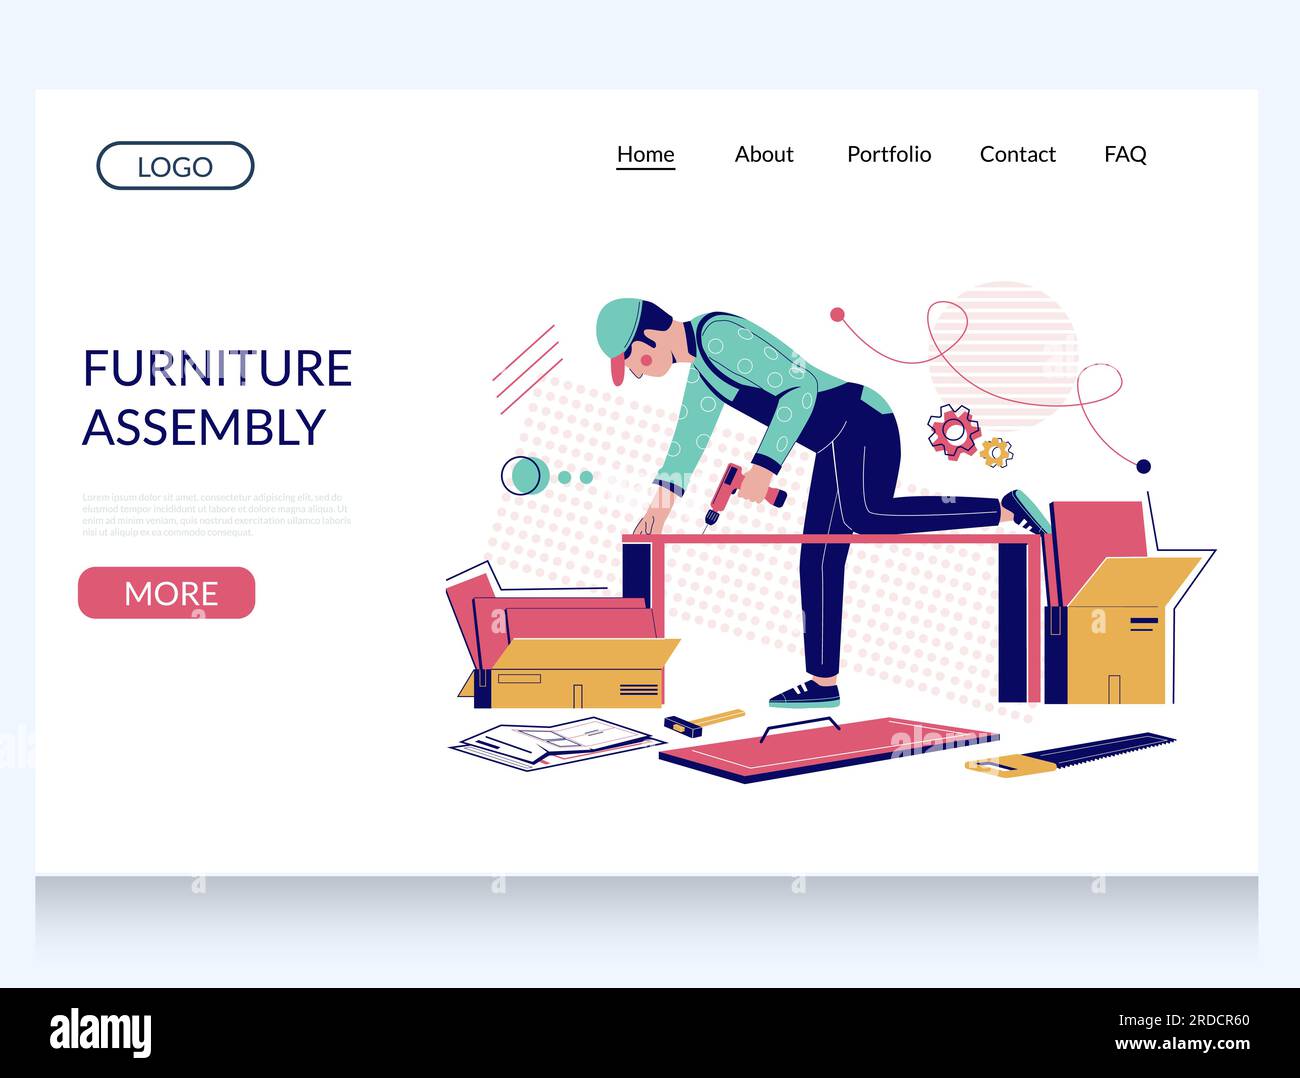 Furniture assembly vector website landing page design template Stock Vector